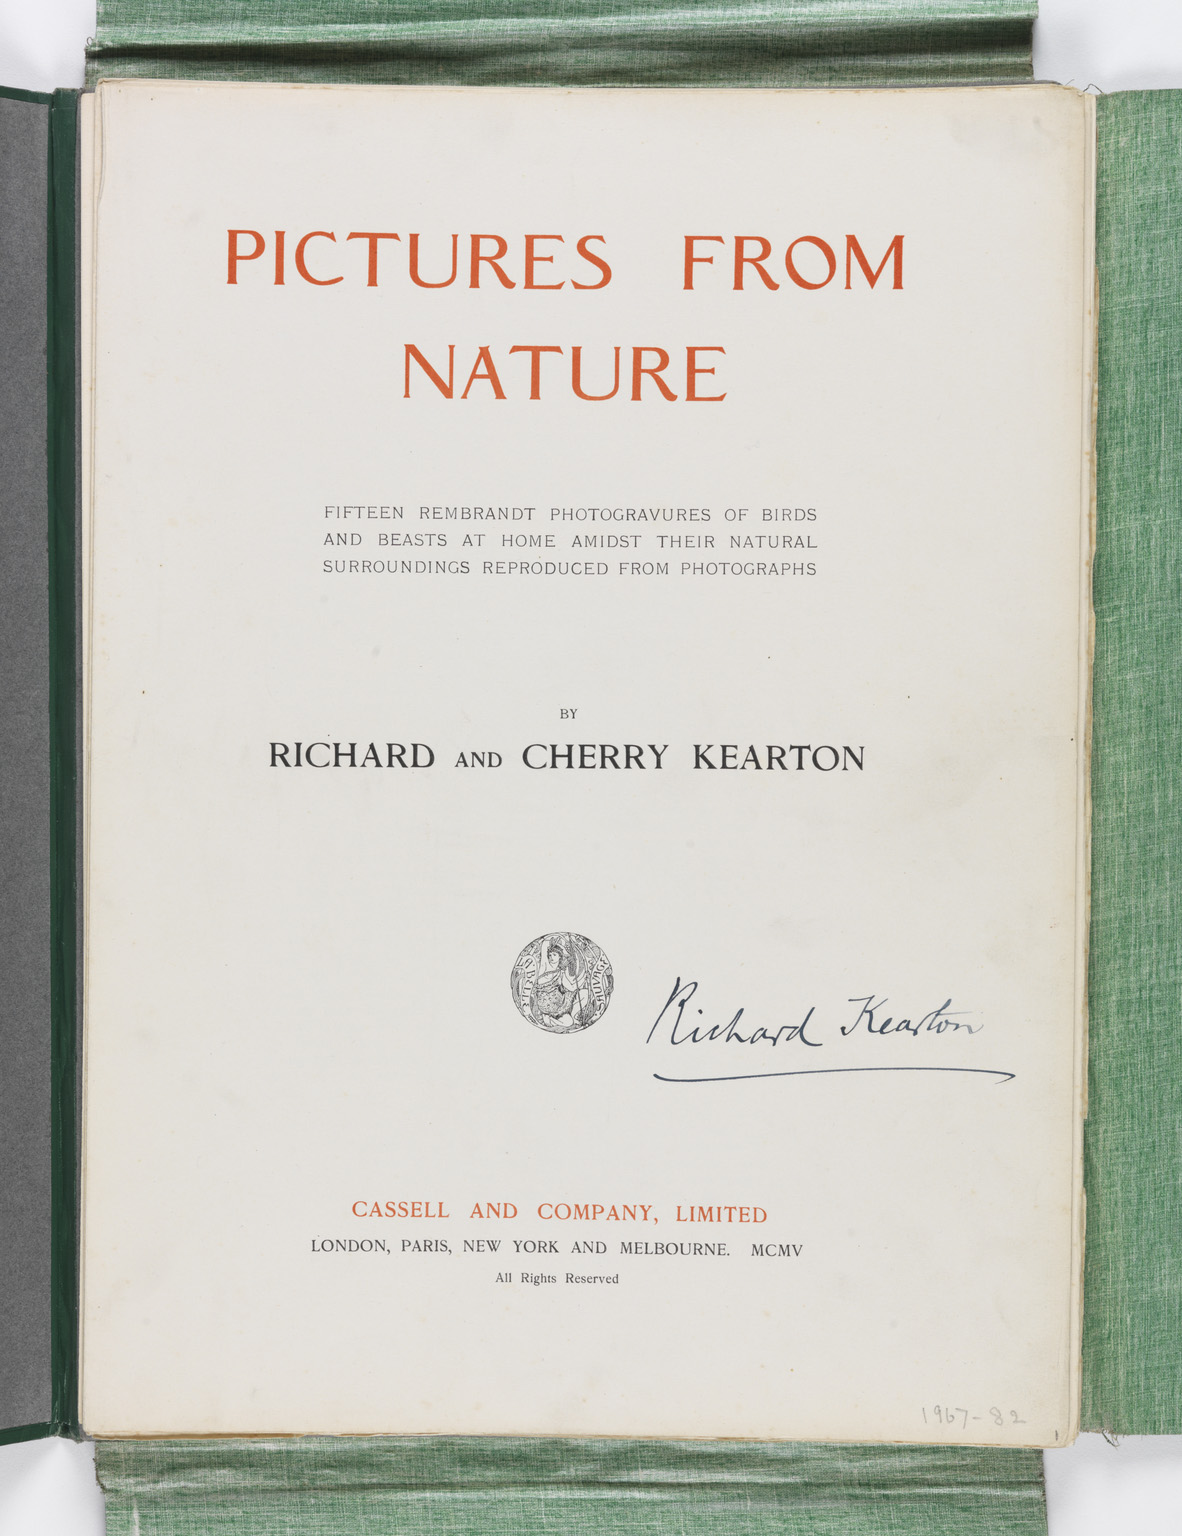 Book, ‘Pictures from Nature' by Richard and Cherry Kearton, (1900-1920)